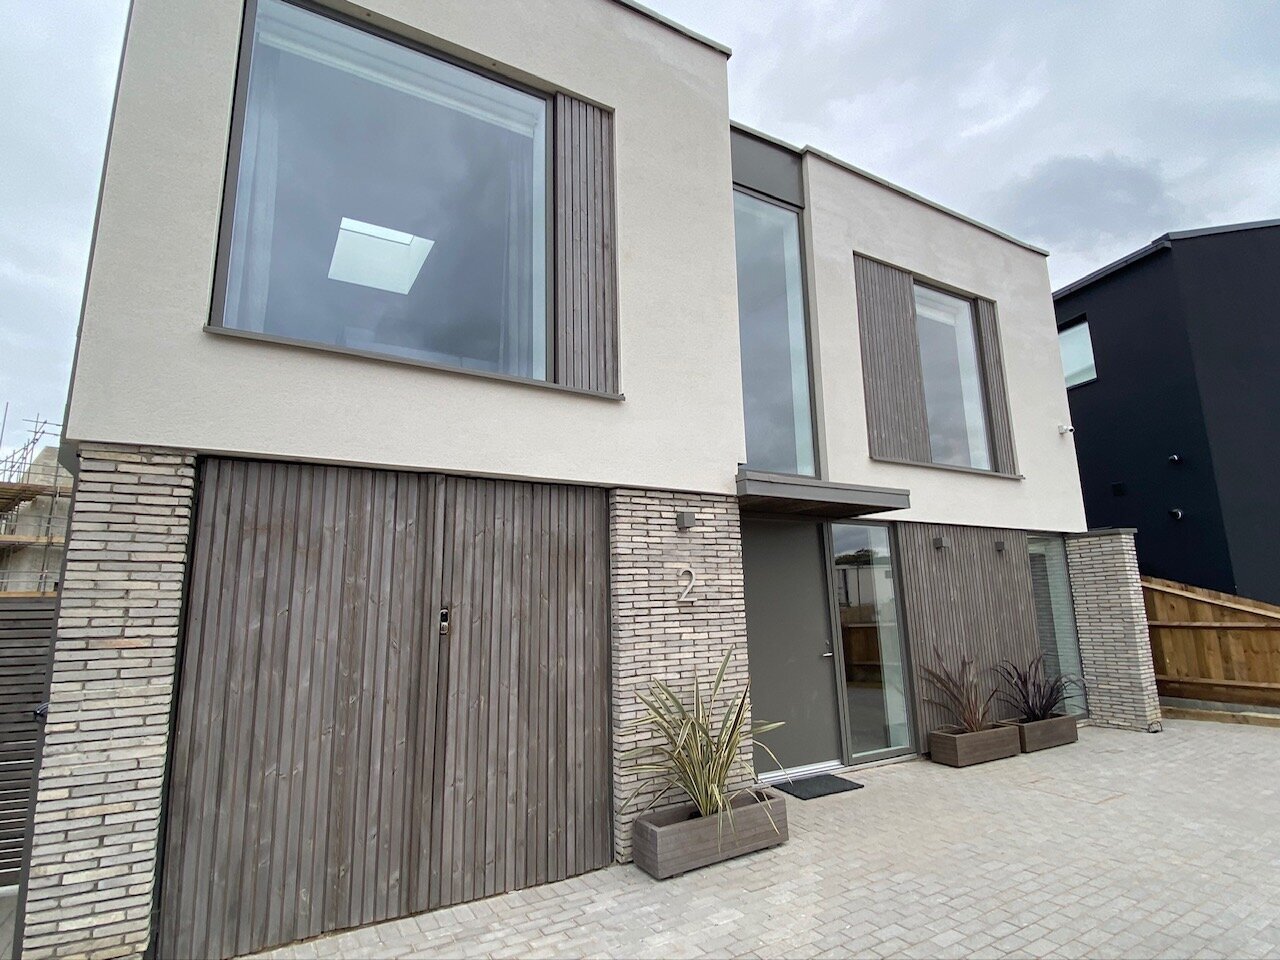 Self-build home in Graven Hill, Bicester